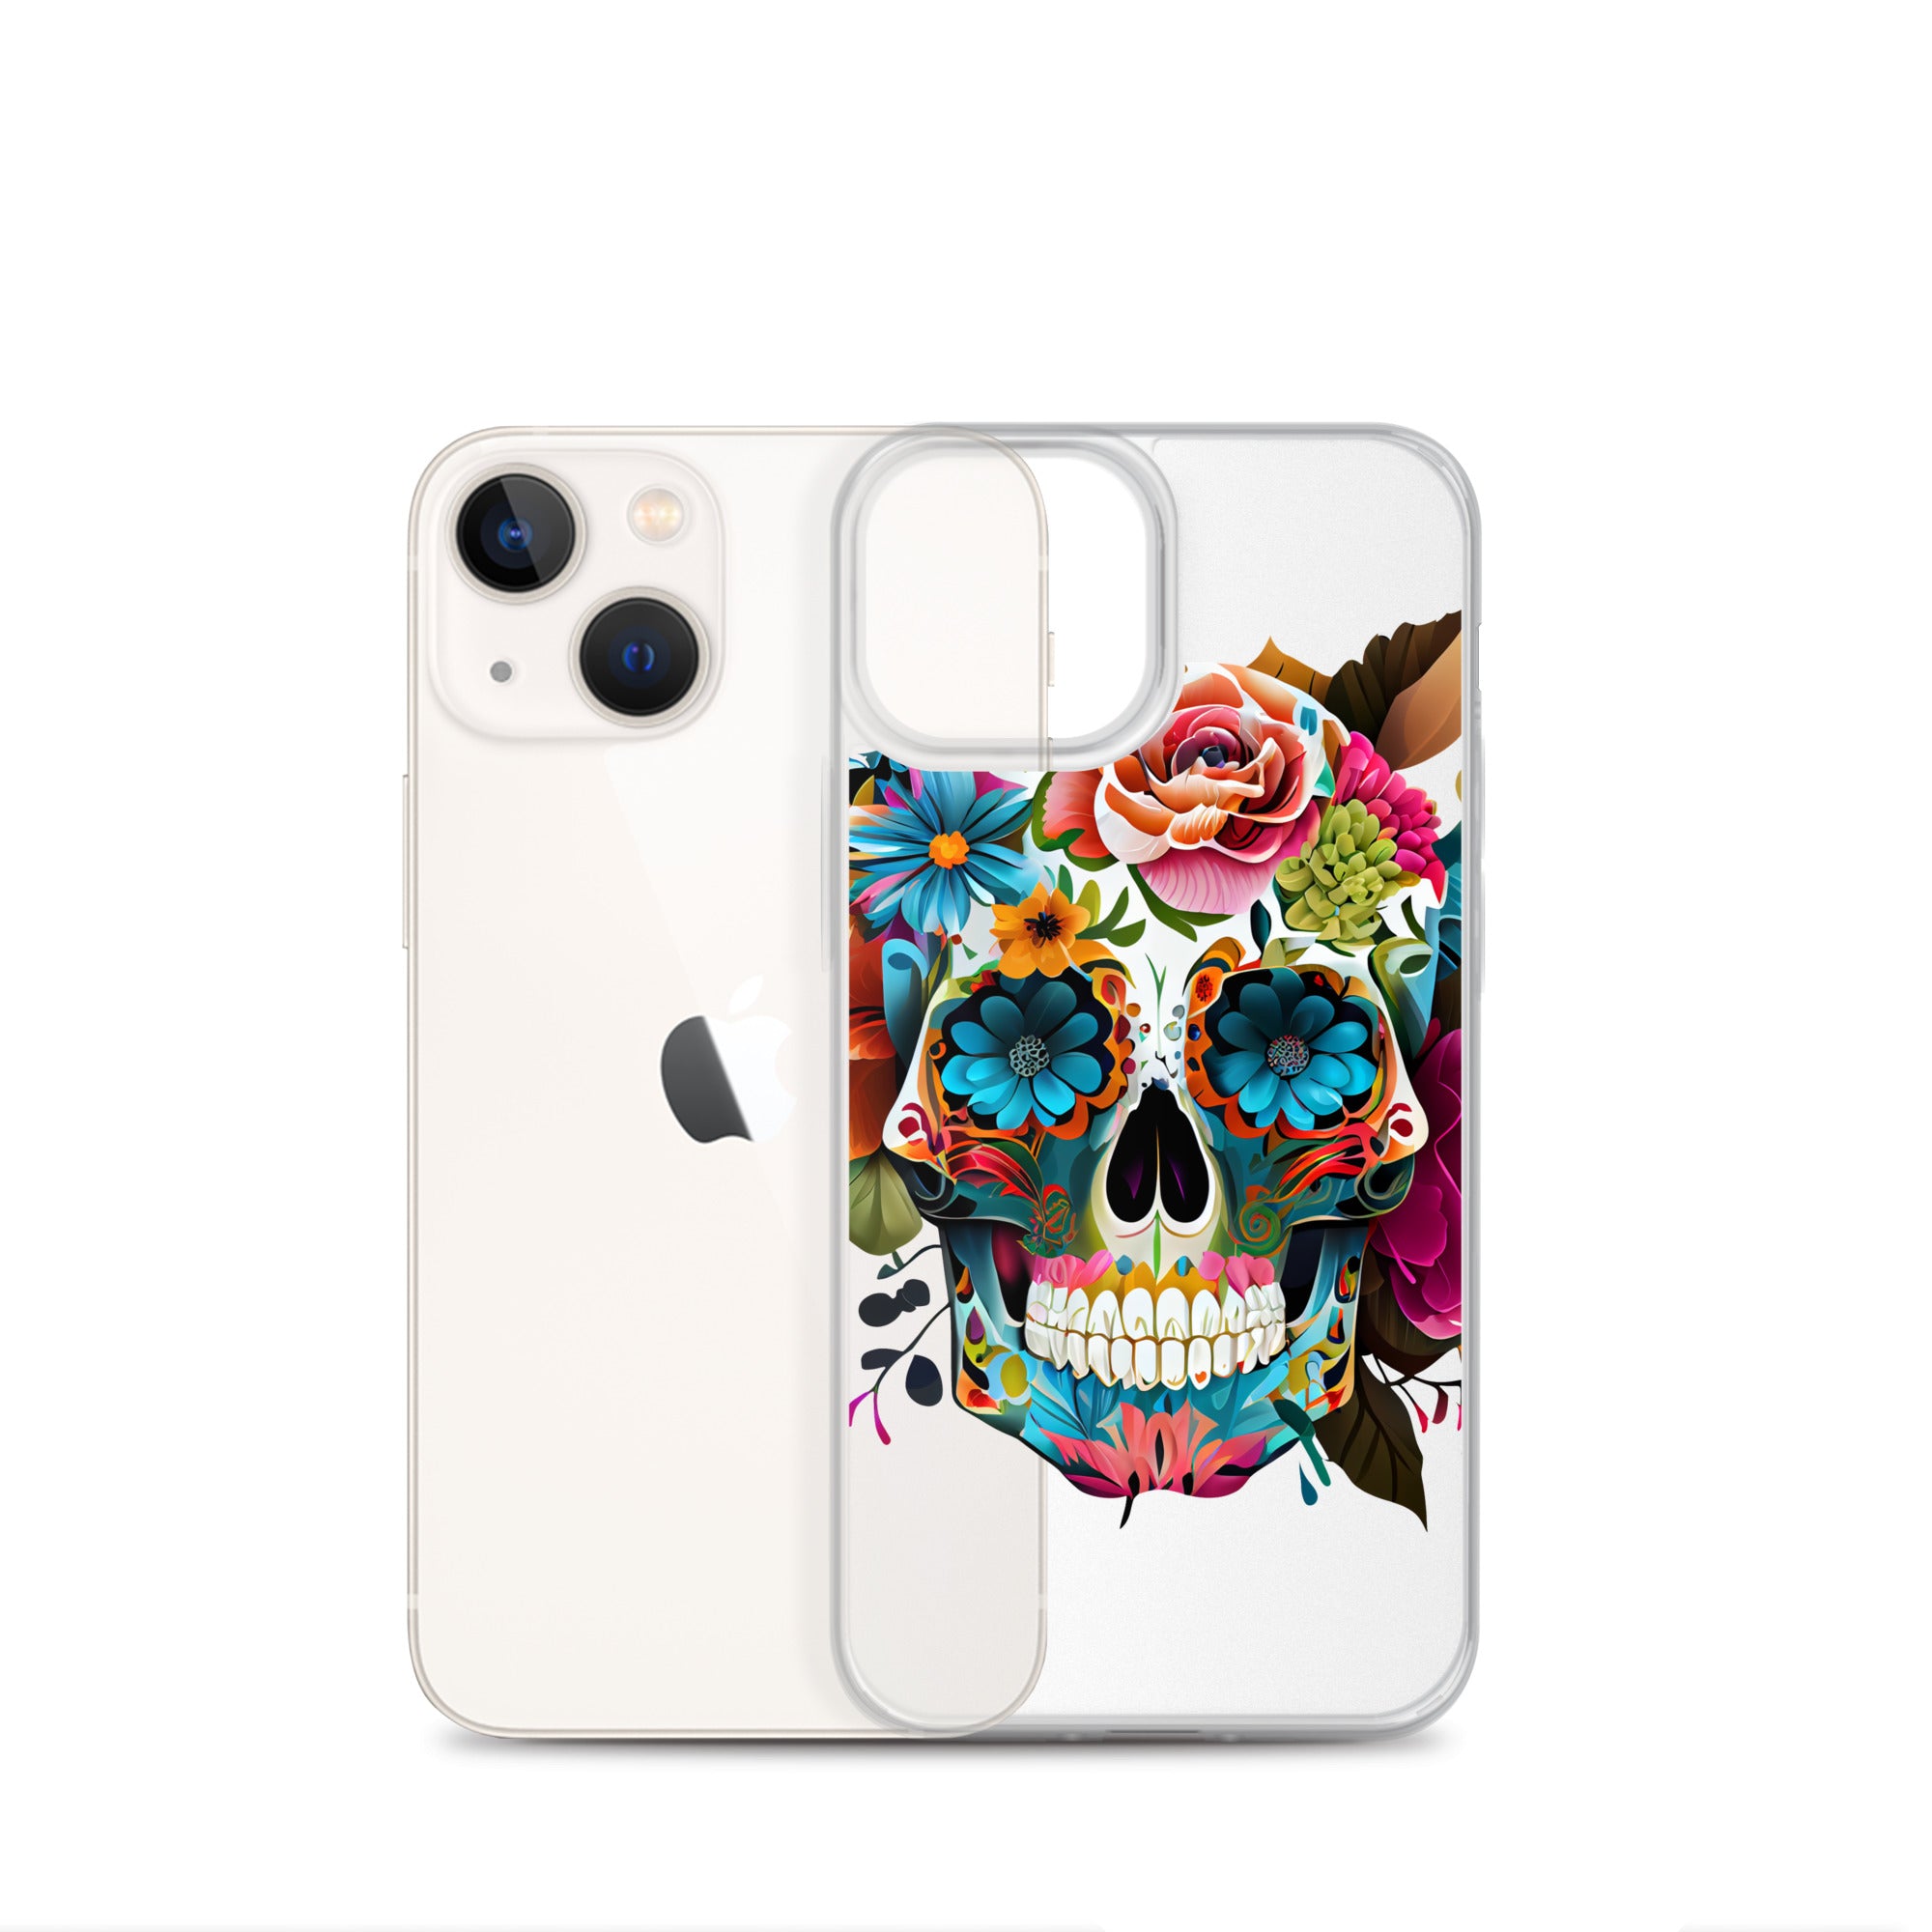 Clear Case for iPhone Accessories, Skeleton case, gift idea